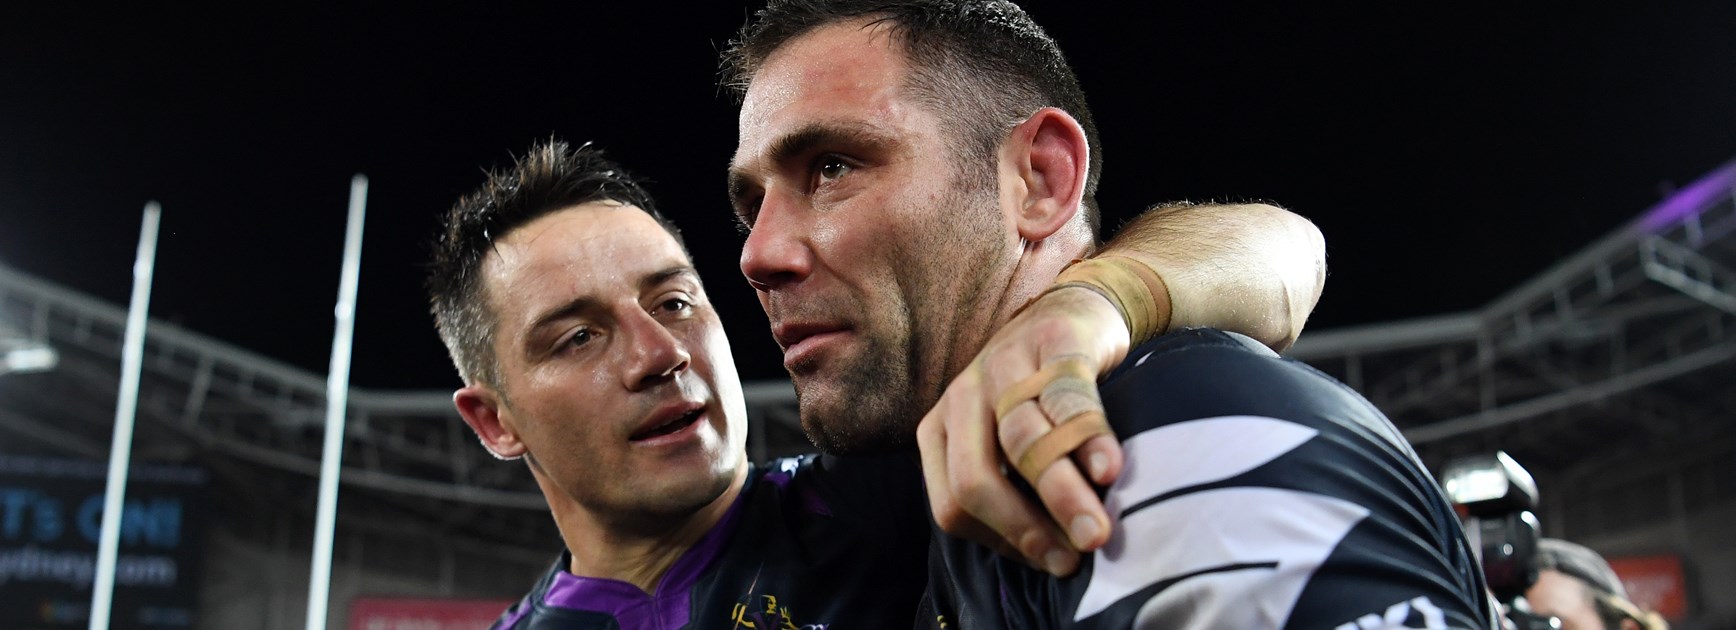 'There's no player I respect more': Cronk buries talk of rift with Smith